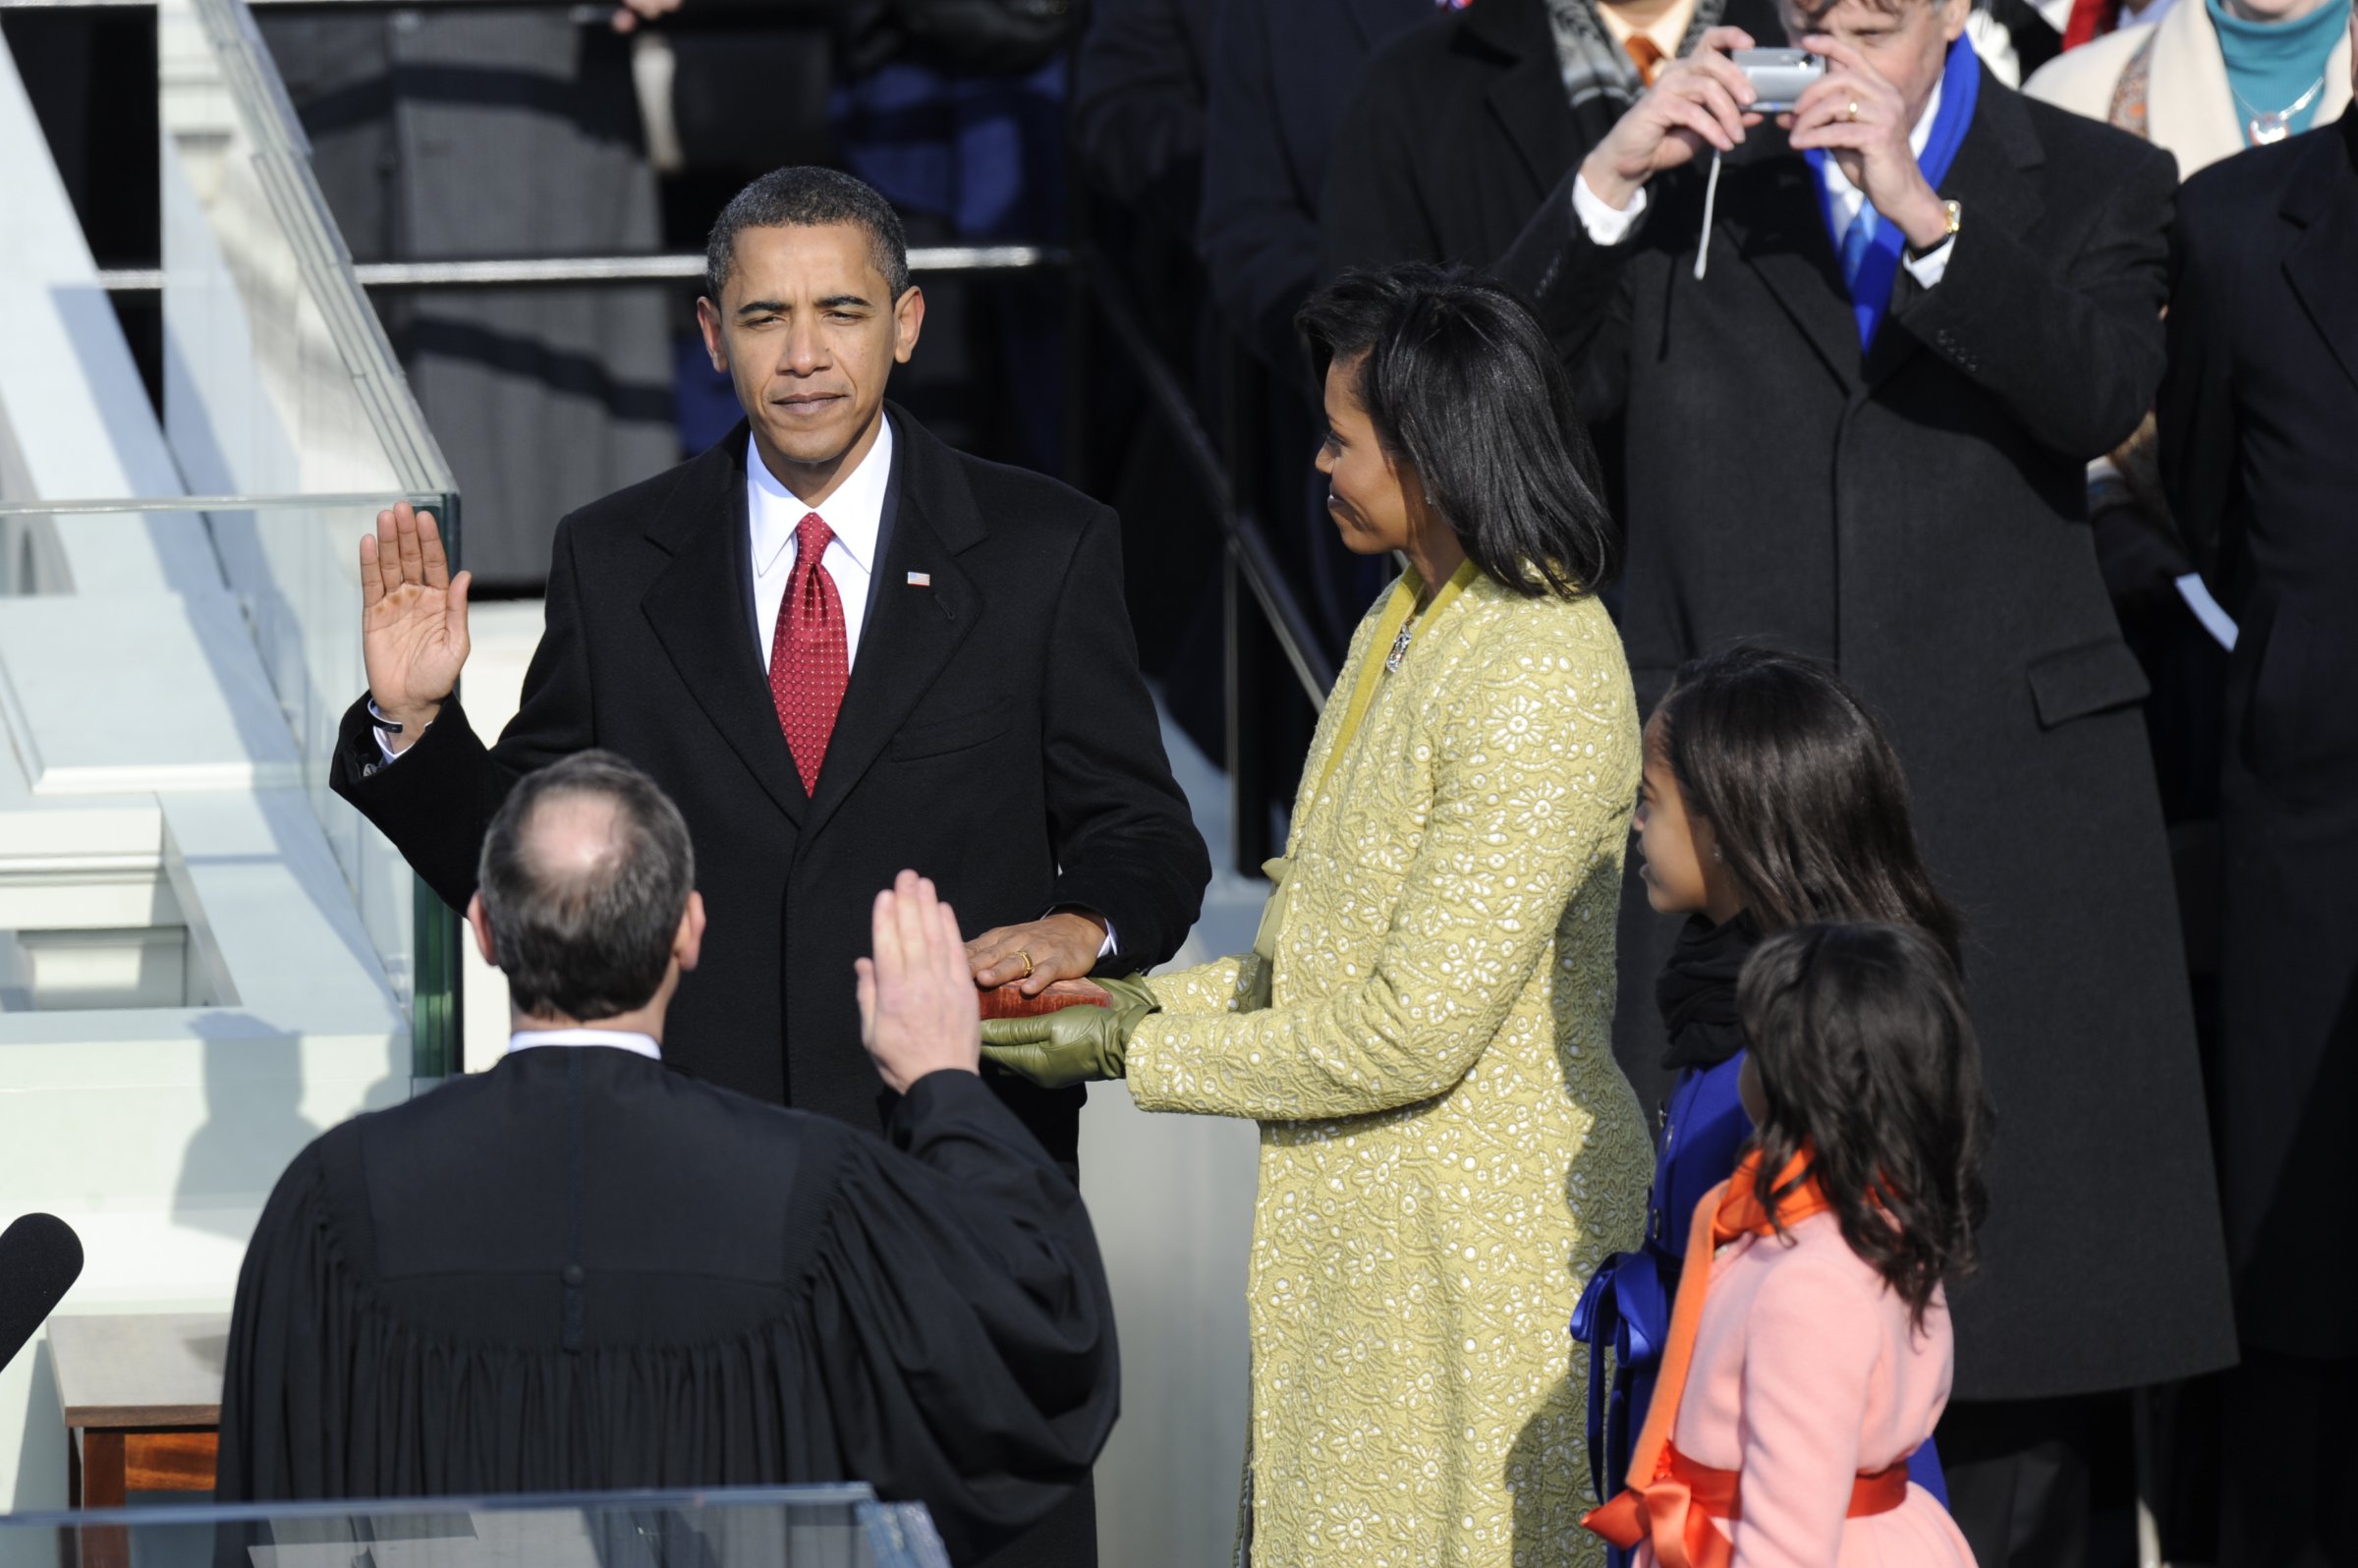 President Elect, Barack Obama, takes the Oath of Office from Chief Justice, Roberts as his wife, Michelle, and his daughters, Malia, and Sasha, far right, during the Presidential Inauguration at the U.S. Capitol Tuesday afternoon.